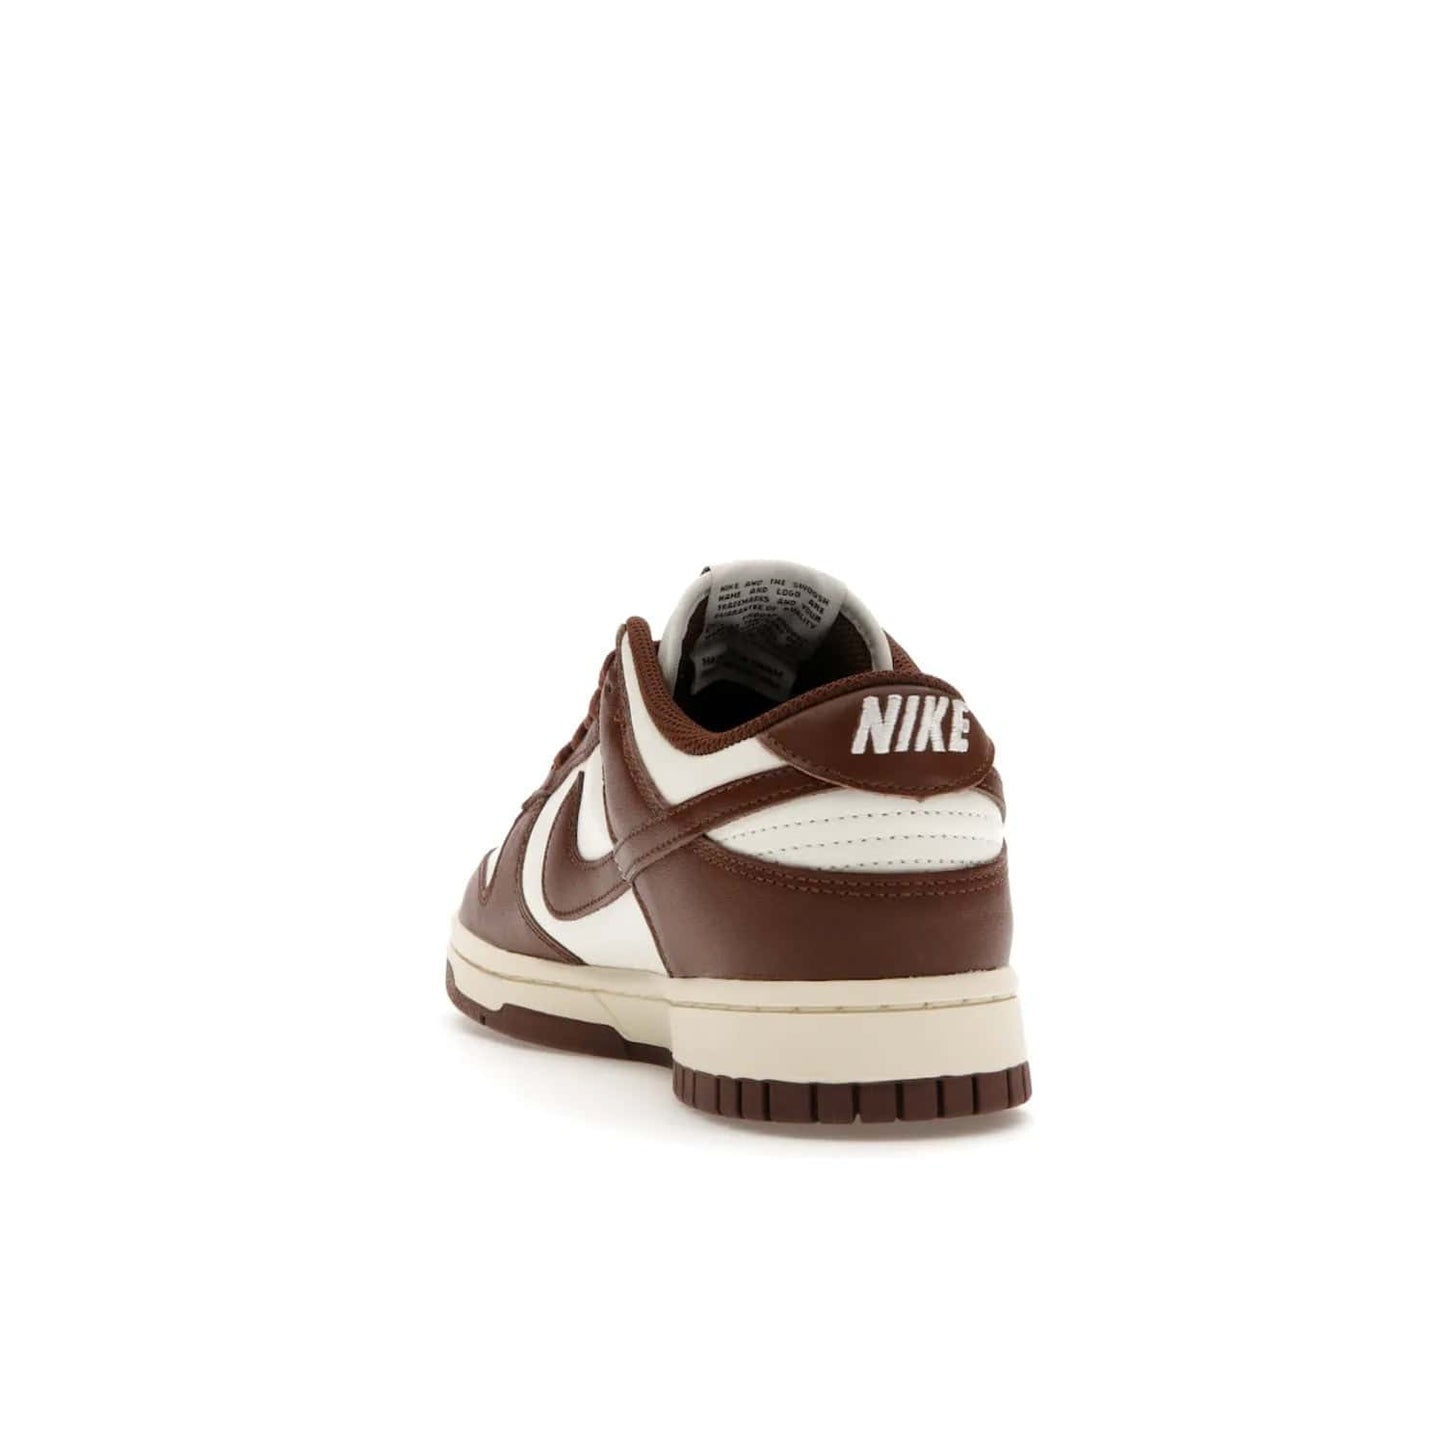 Nike Dunk Low Cacao Wow (Women's) - Image 26 - Only at www.BallersClubKickz.com - Revised
Get the Nike Dunk Low Cacao Wow and make a statement! Plush leather and a cool Cacao Wow finish bring together a unique mix of comfort and fashion that will turn heads. Boosted with a Coconut Milk hue. Shop today.